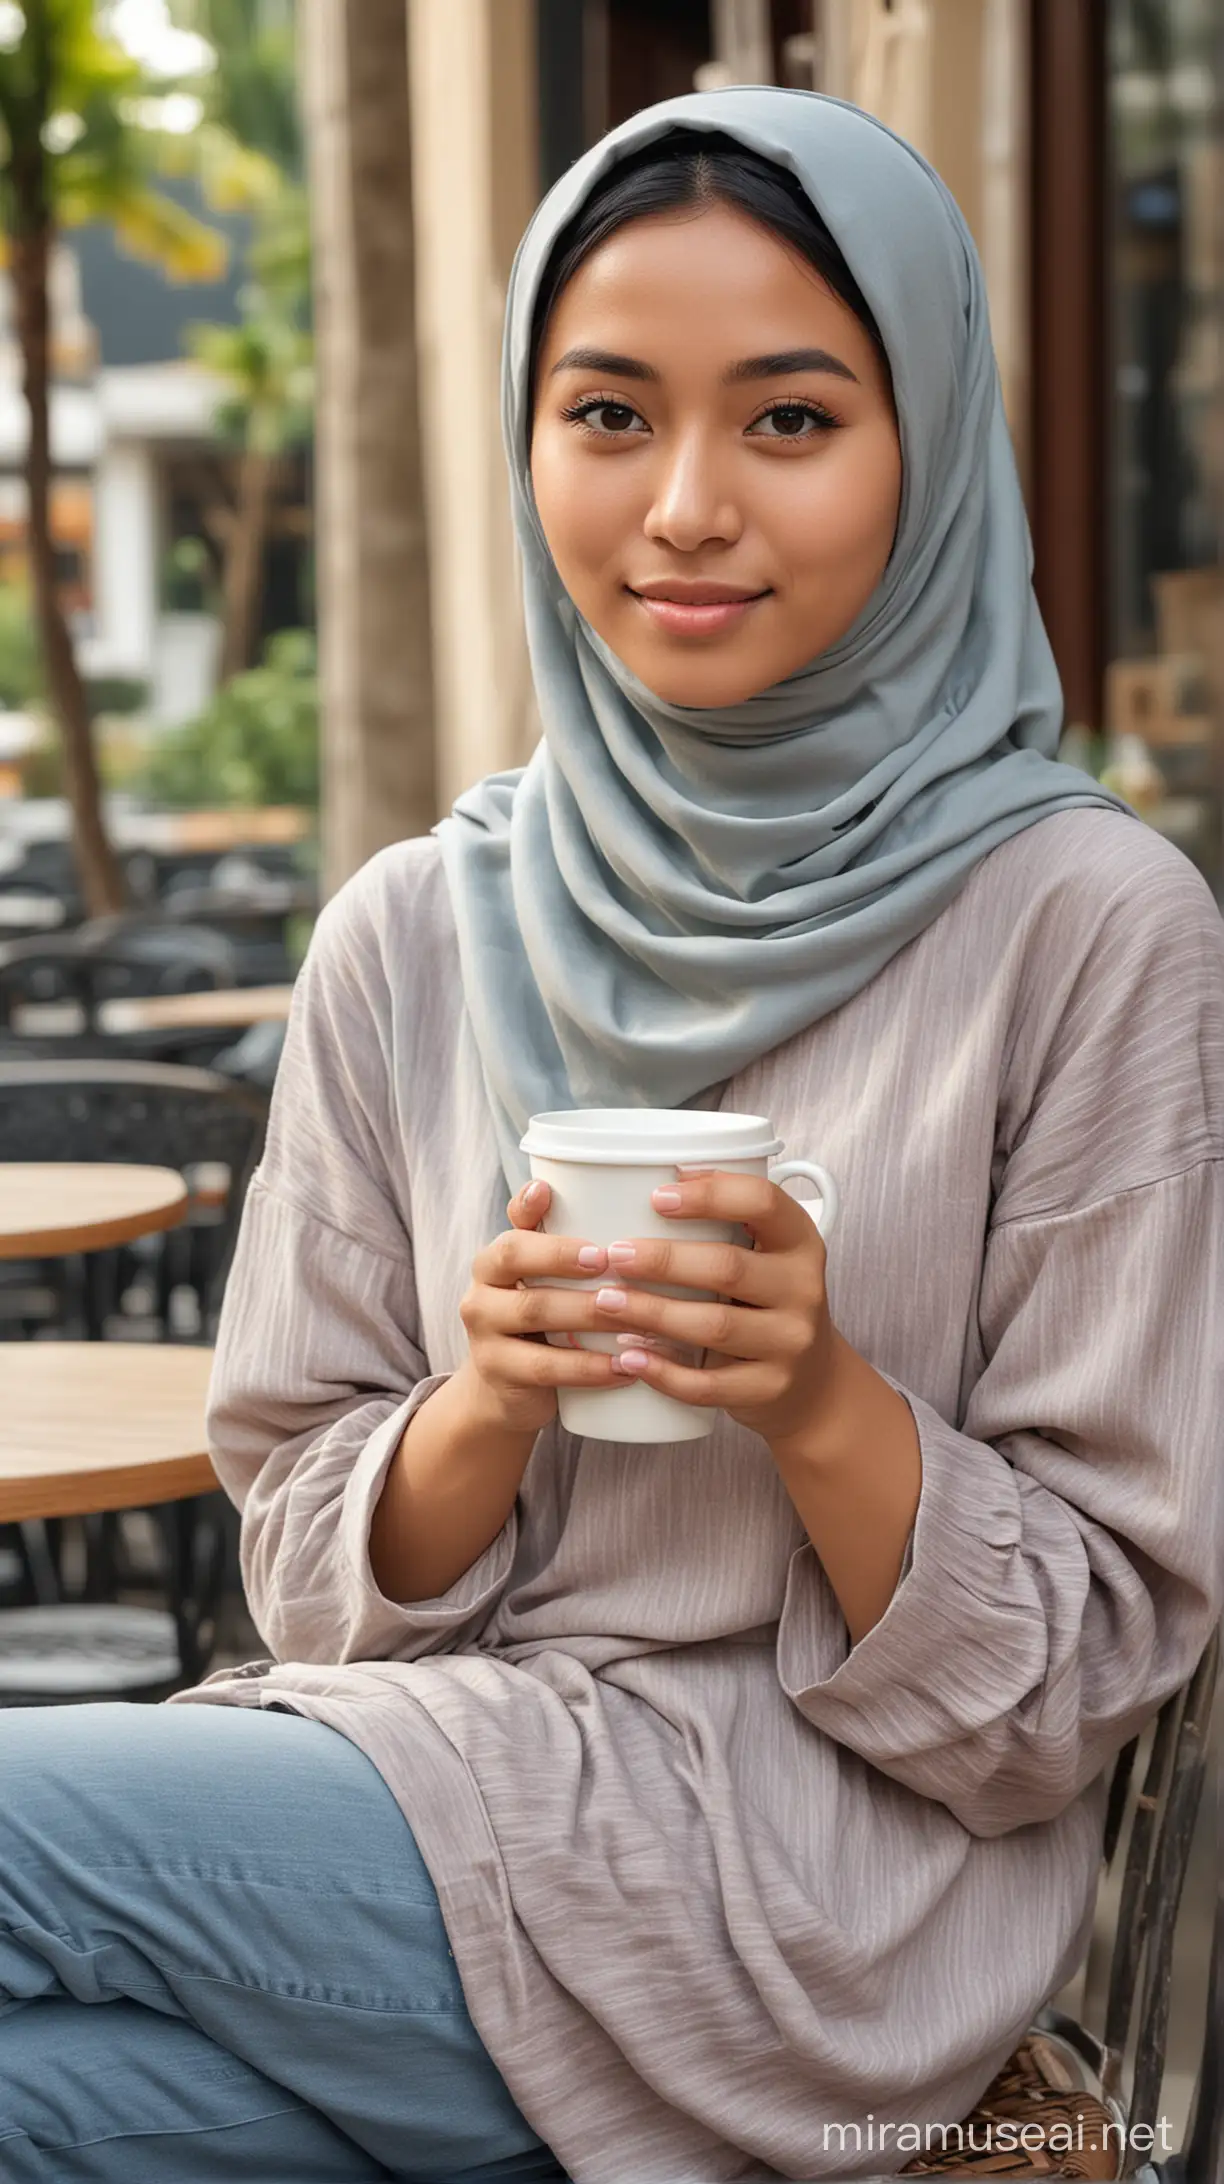 Young Indonesian Woman in Casual Hijab with Coffee at Outdoor Cafe